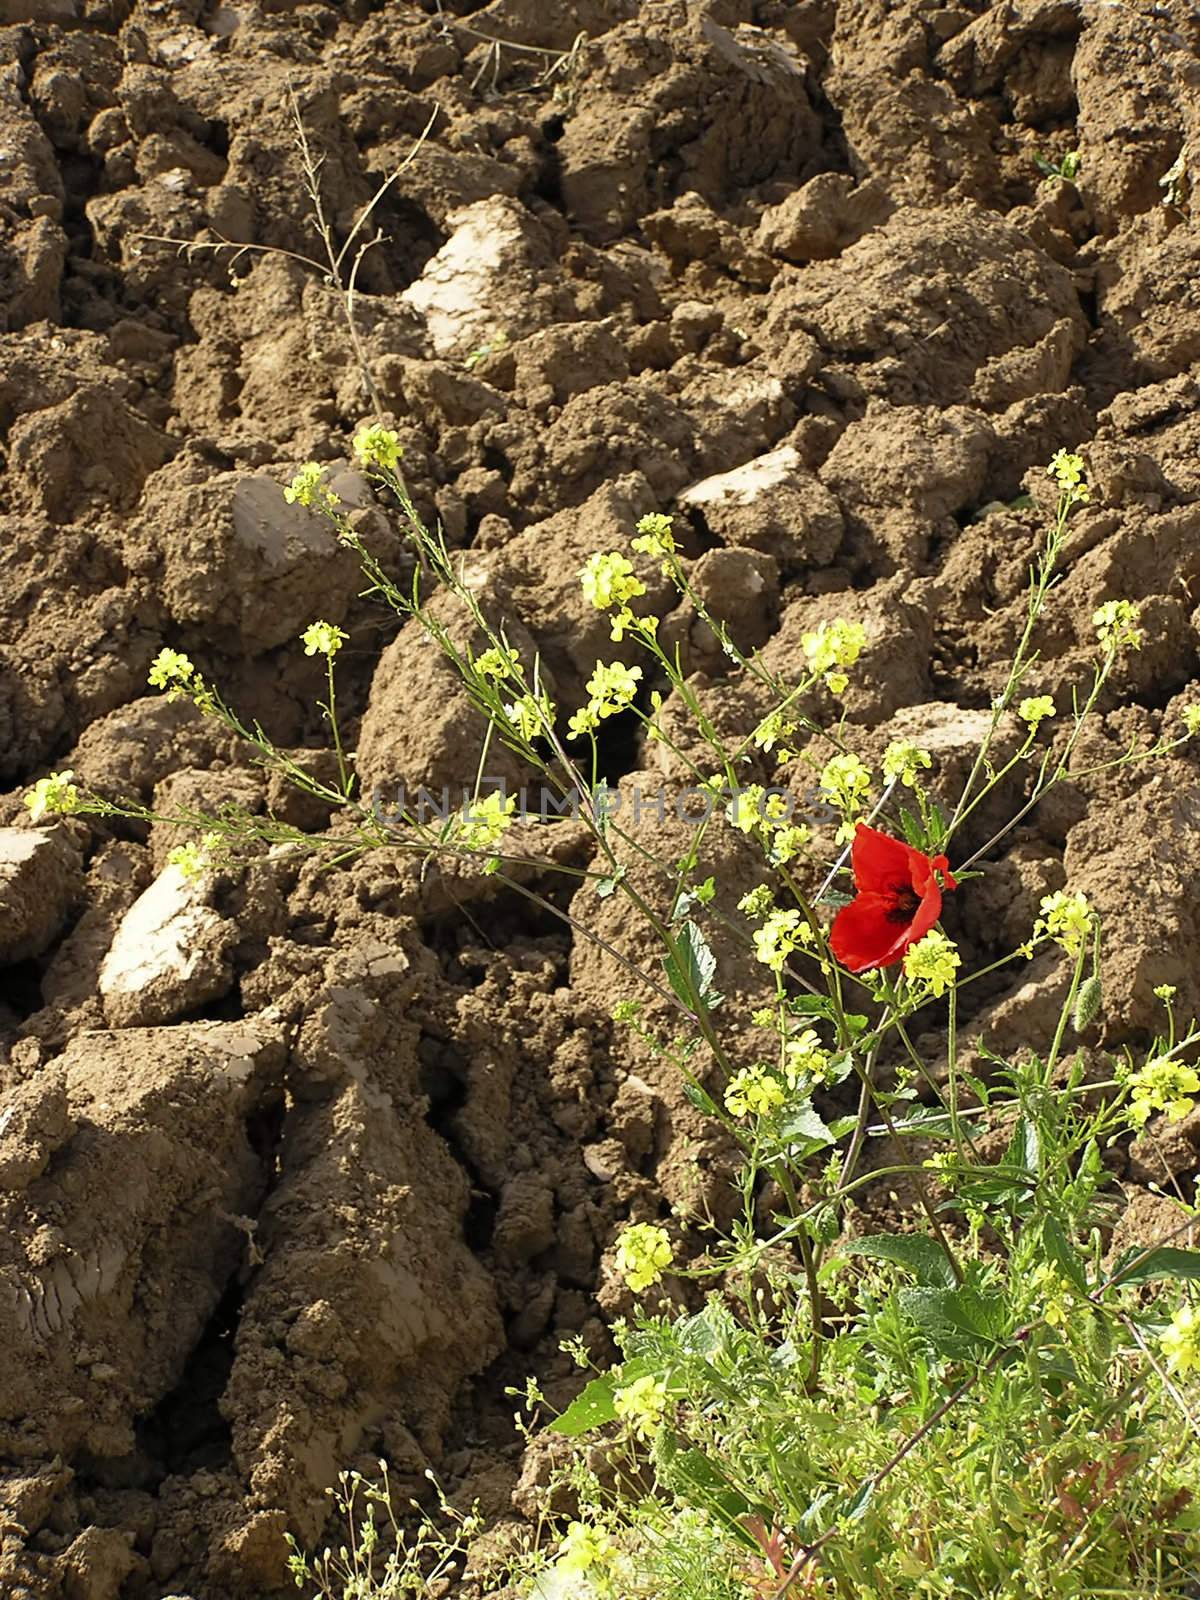 A red poppy, oil seed rape and green grass near acre.